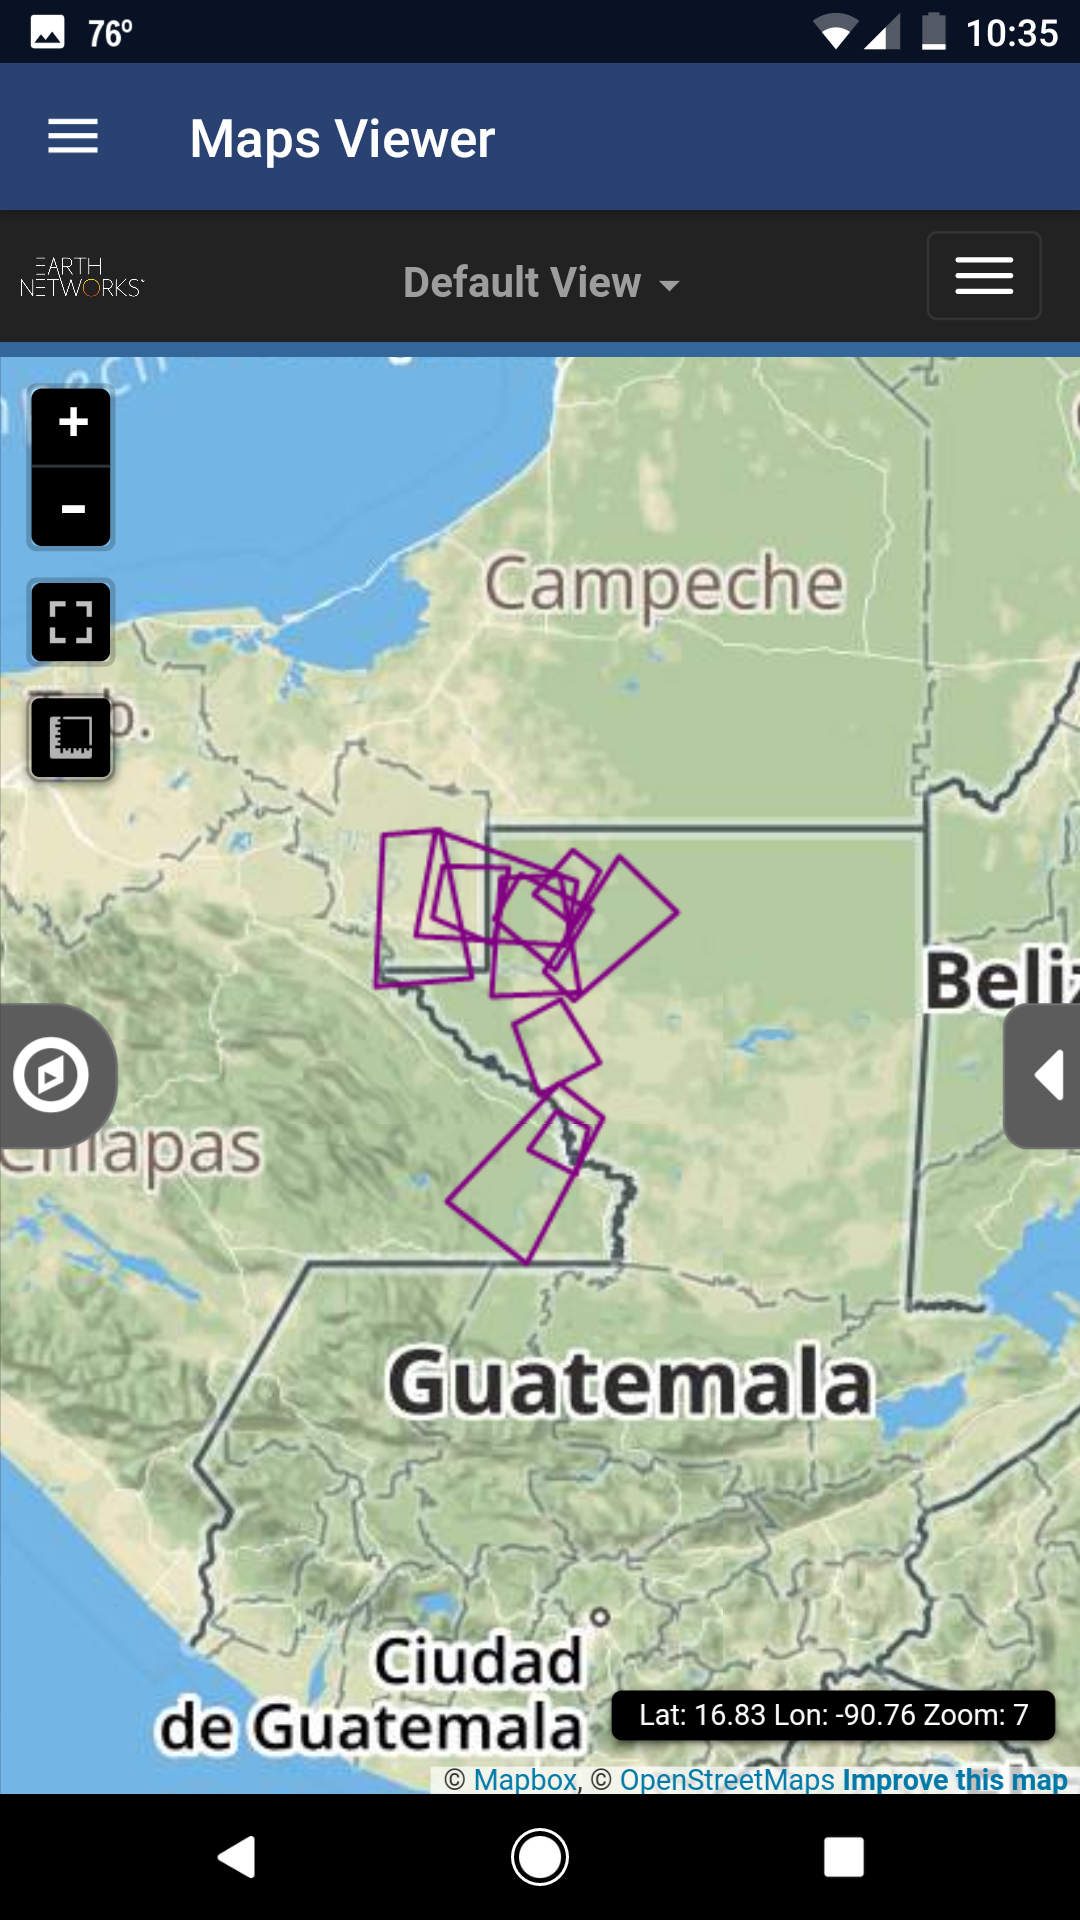 Severe Weather in Guatemala: Earth Networks and ClimaYa Report